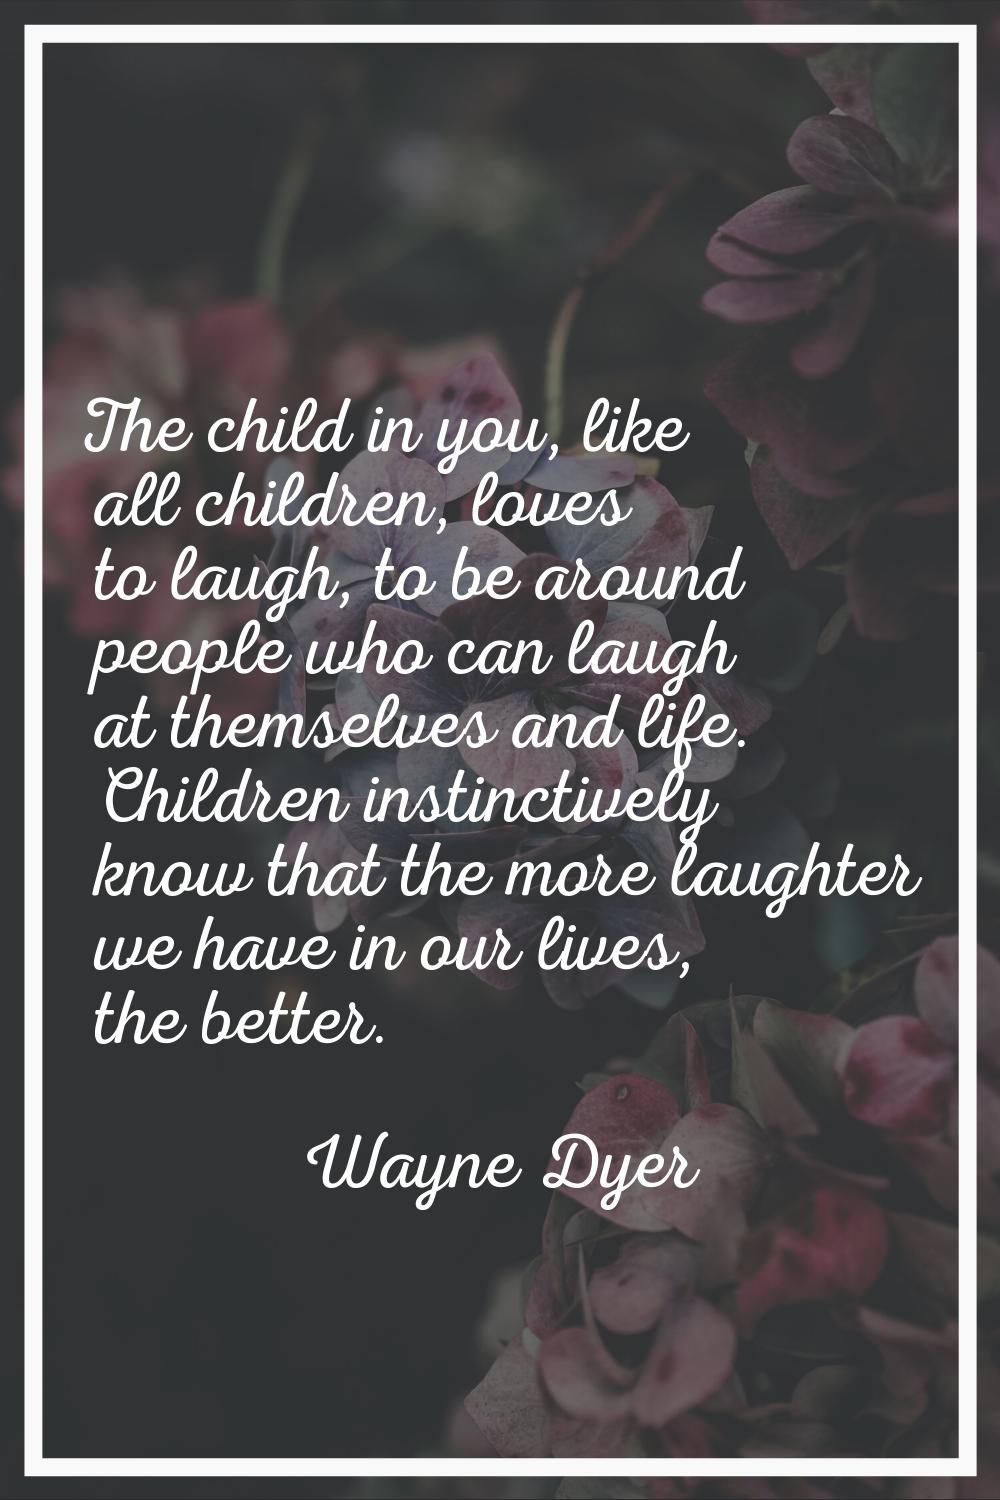 The child in you, like all children, loves to laugh, to be around people who can laugh at themselve